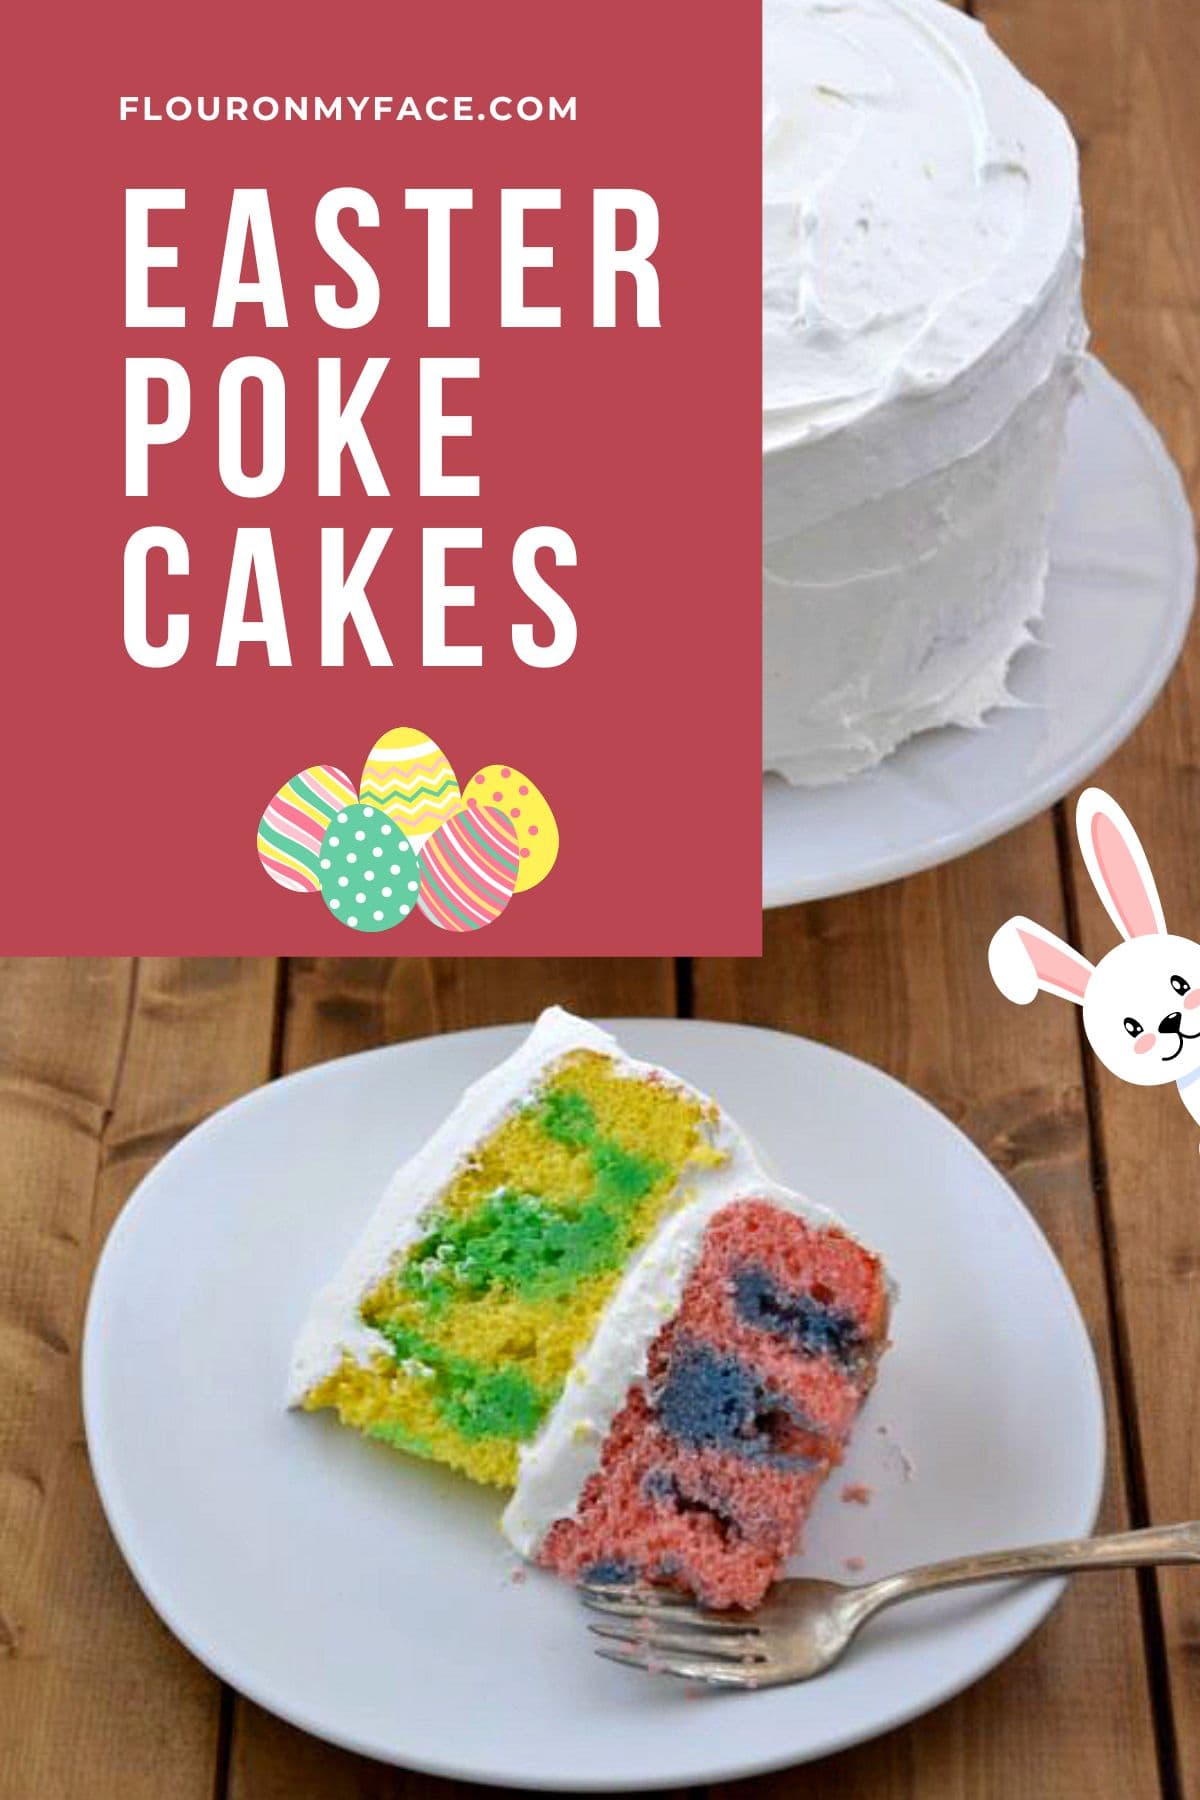 Large vertical image of an Easter Poke Cake.